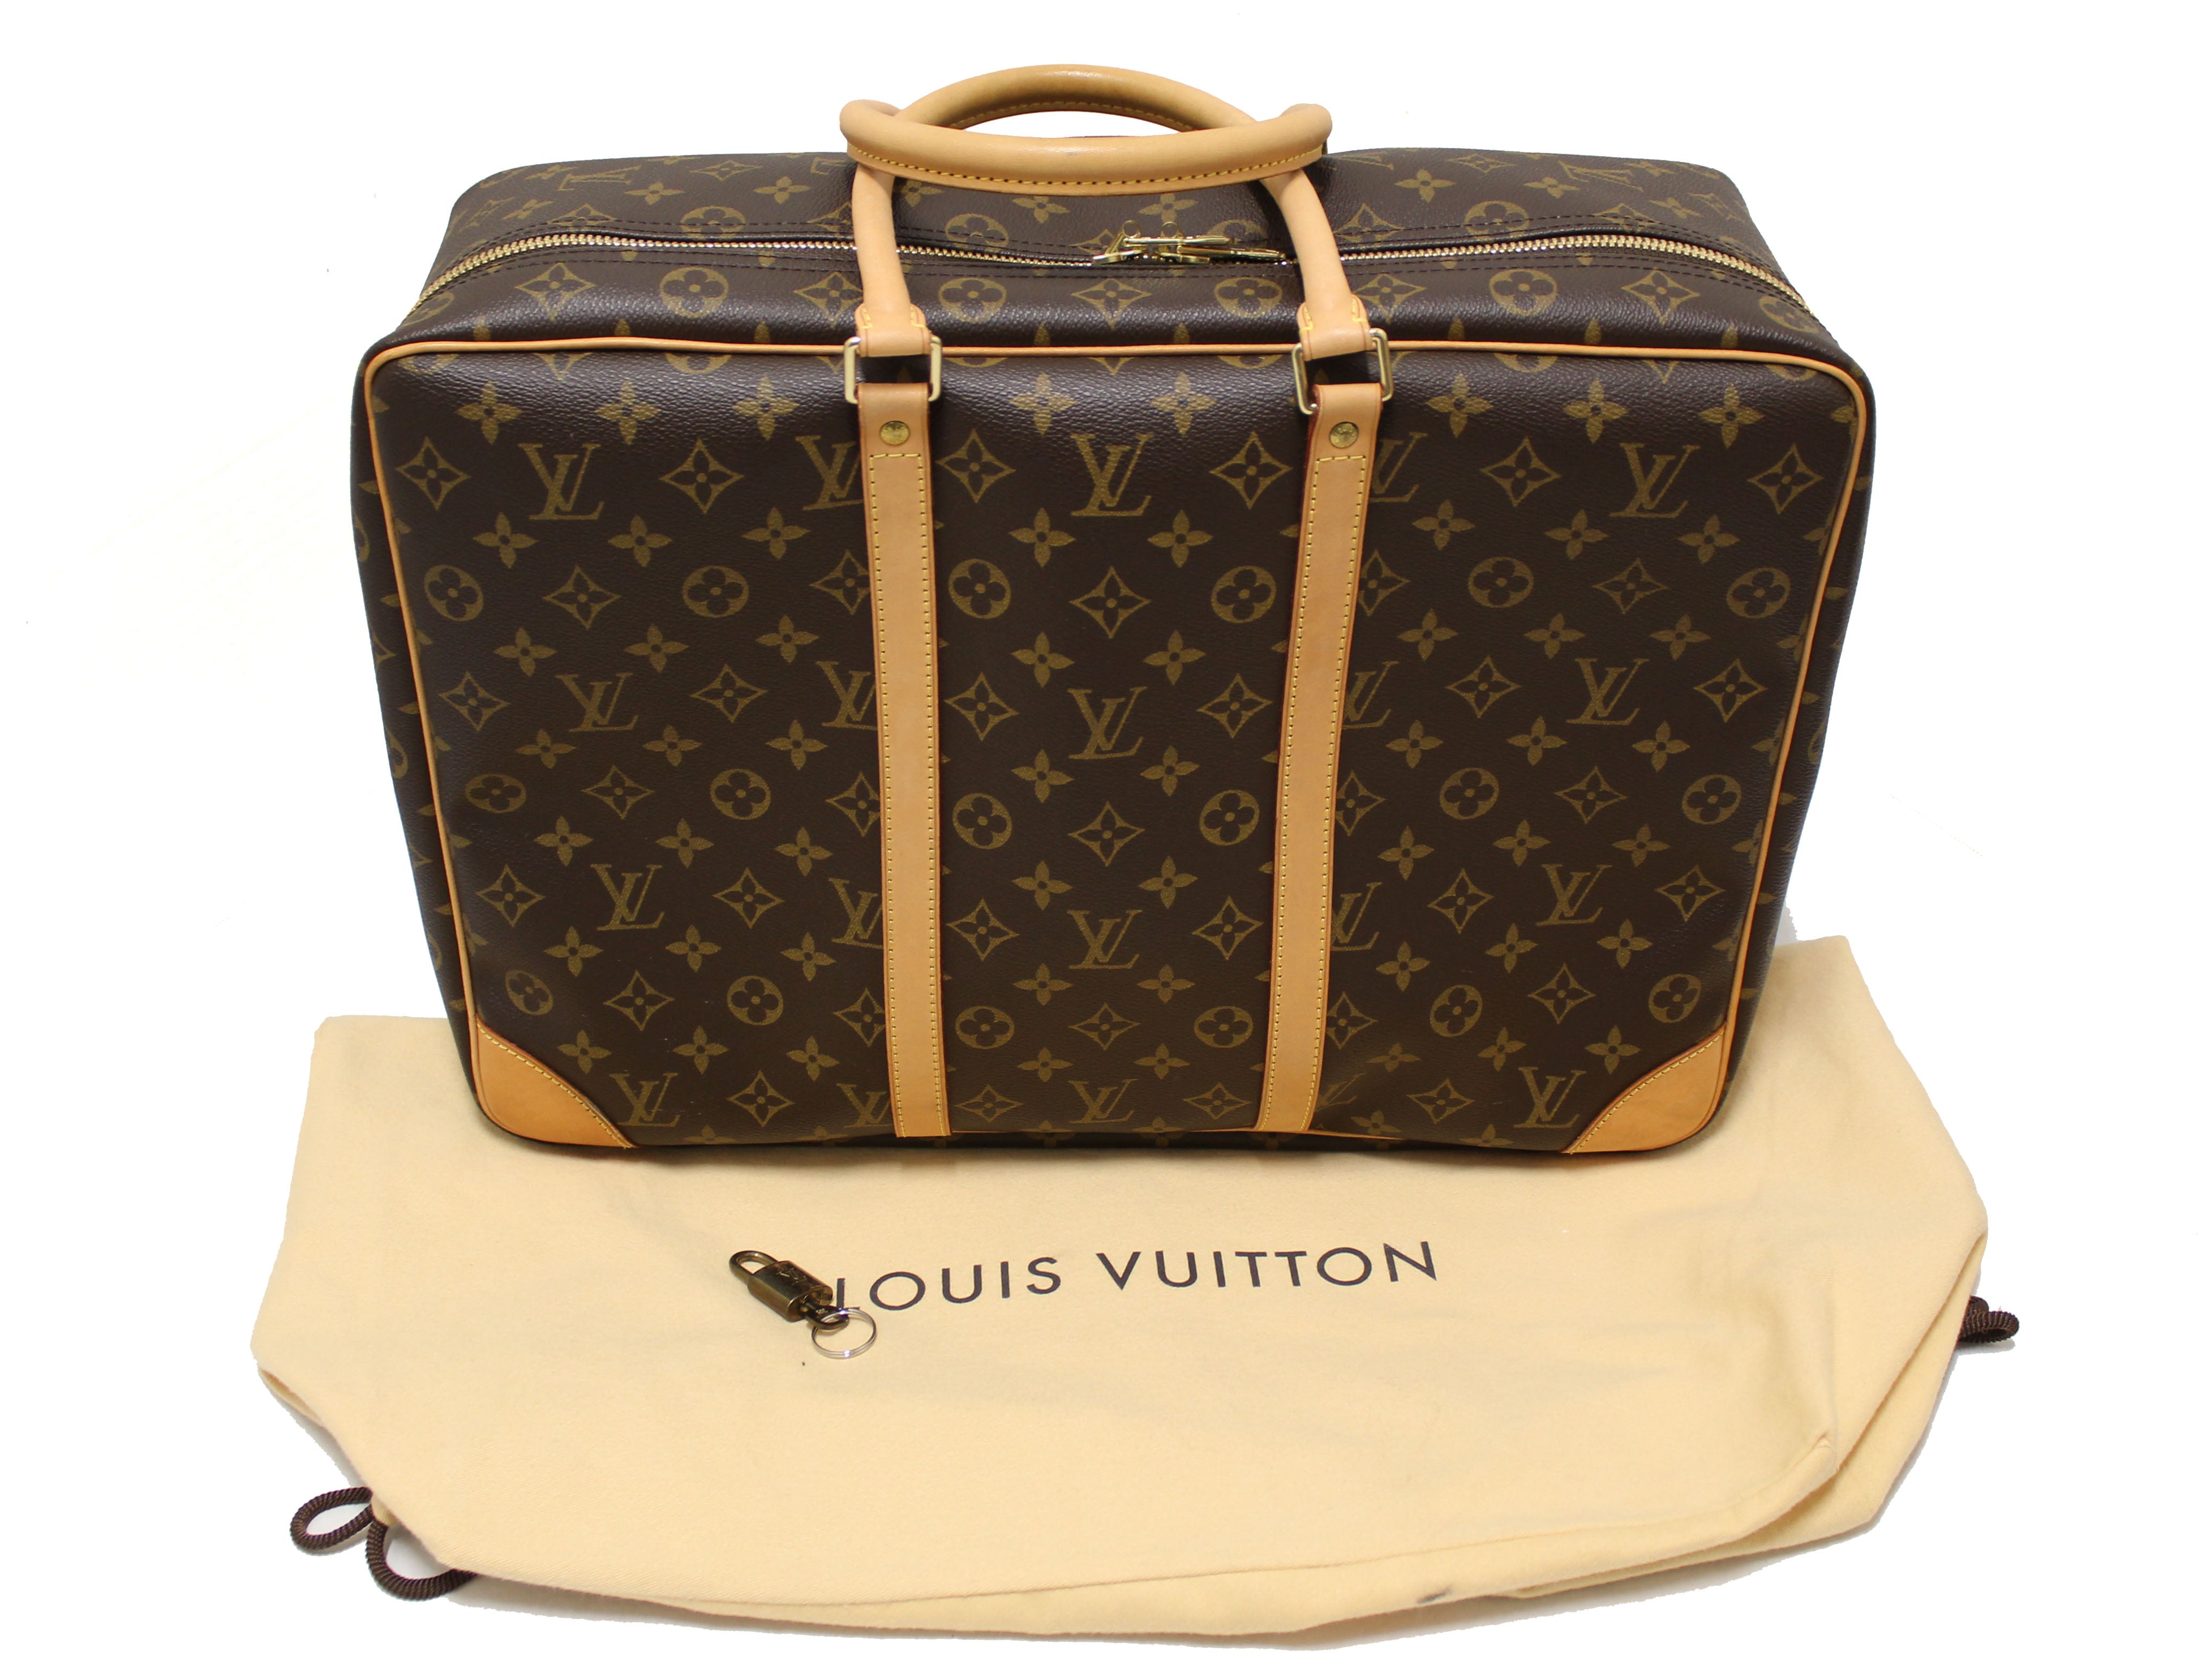 Shop Louis Vuitton MONOGRAM Carry-on Luggage & Travel Bags by